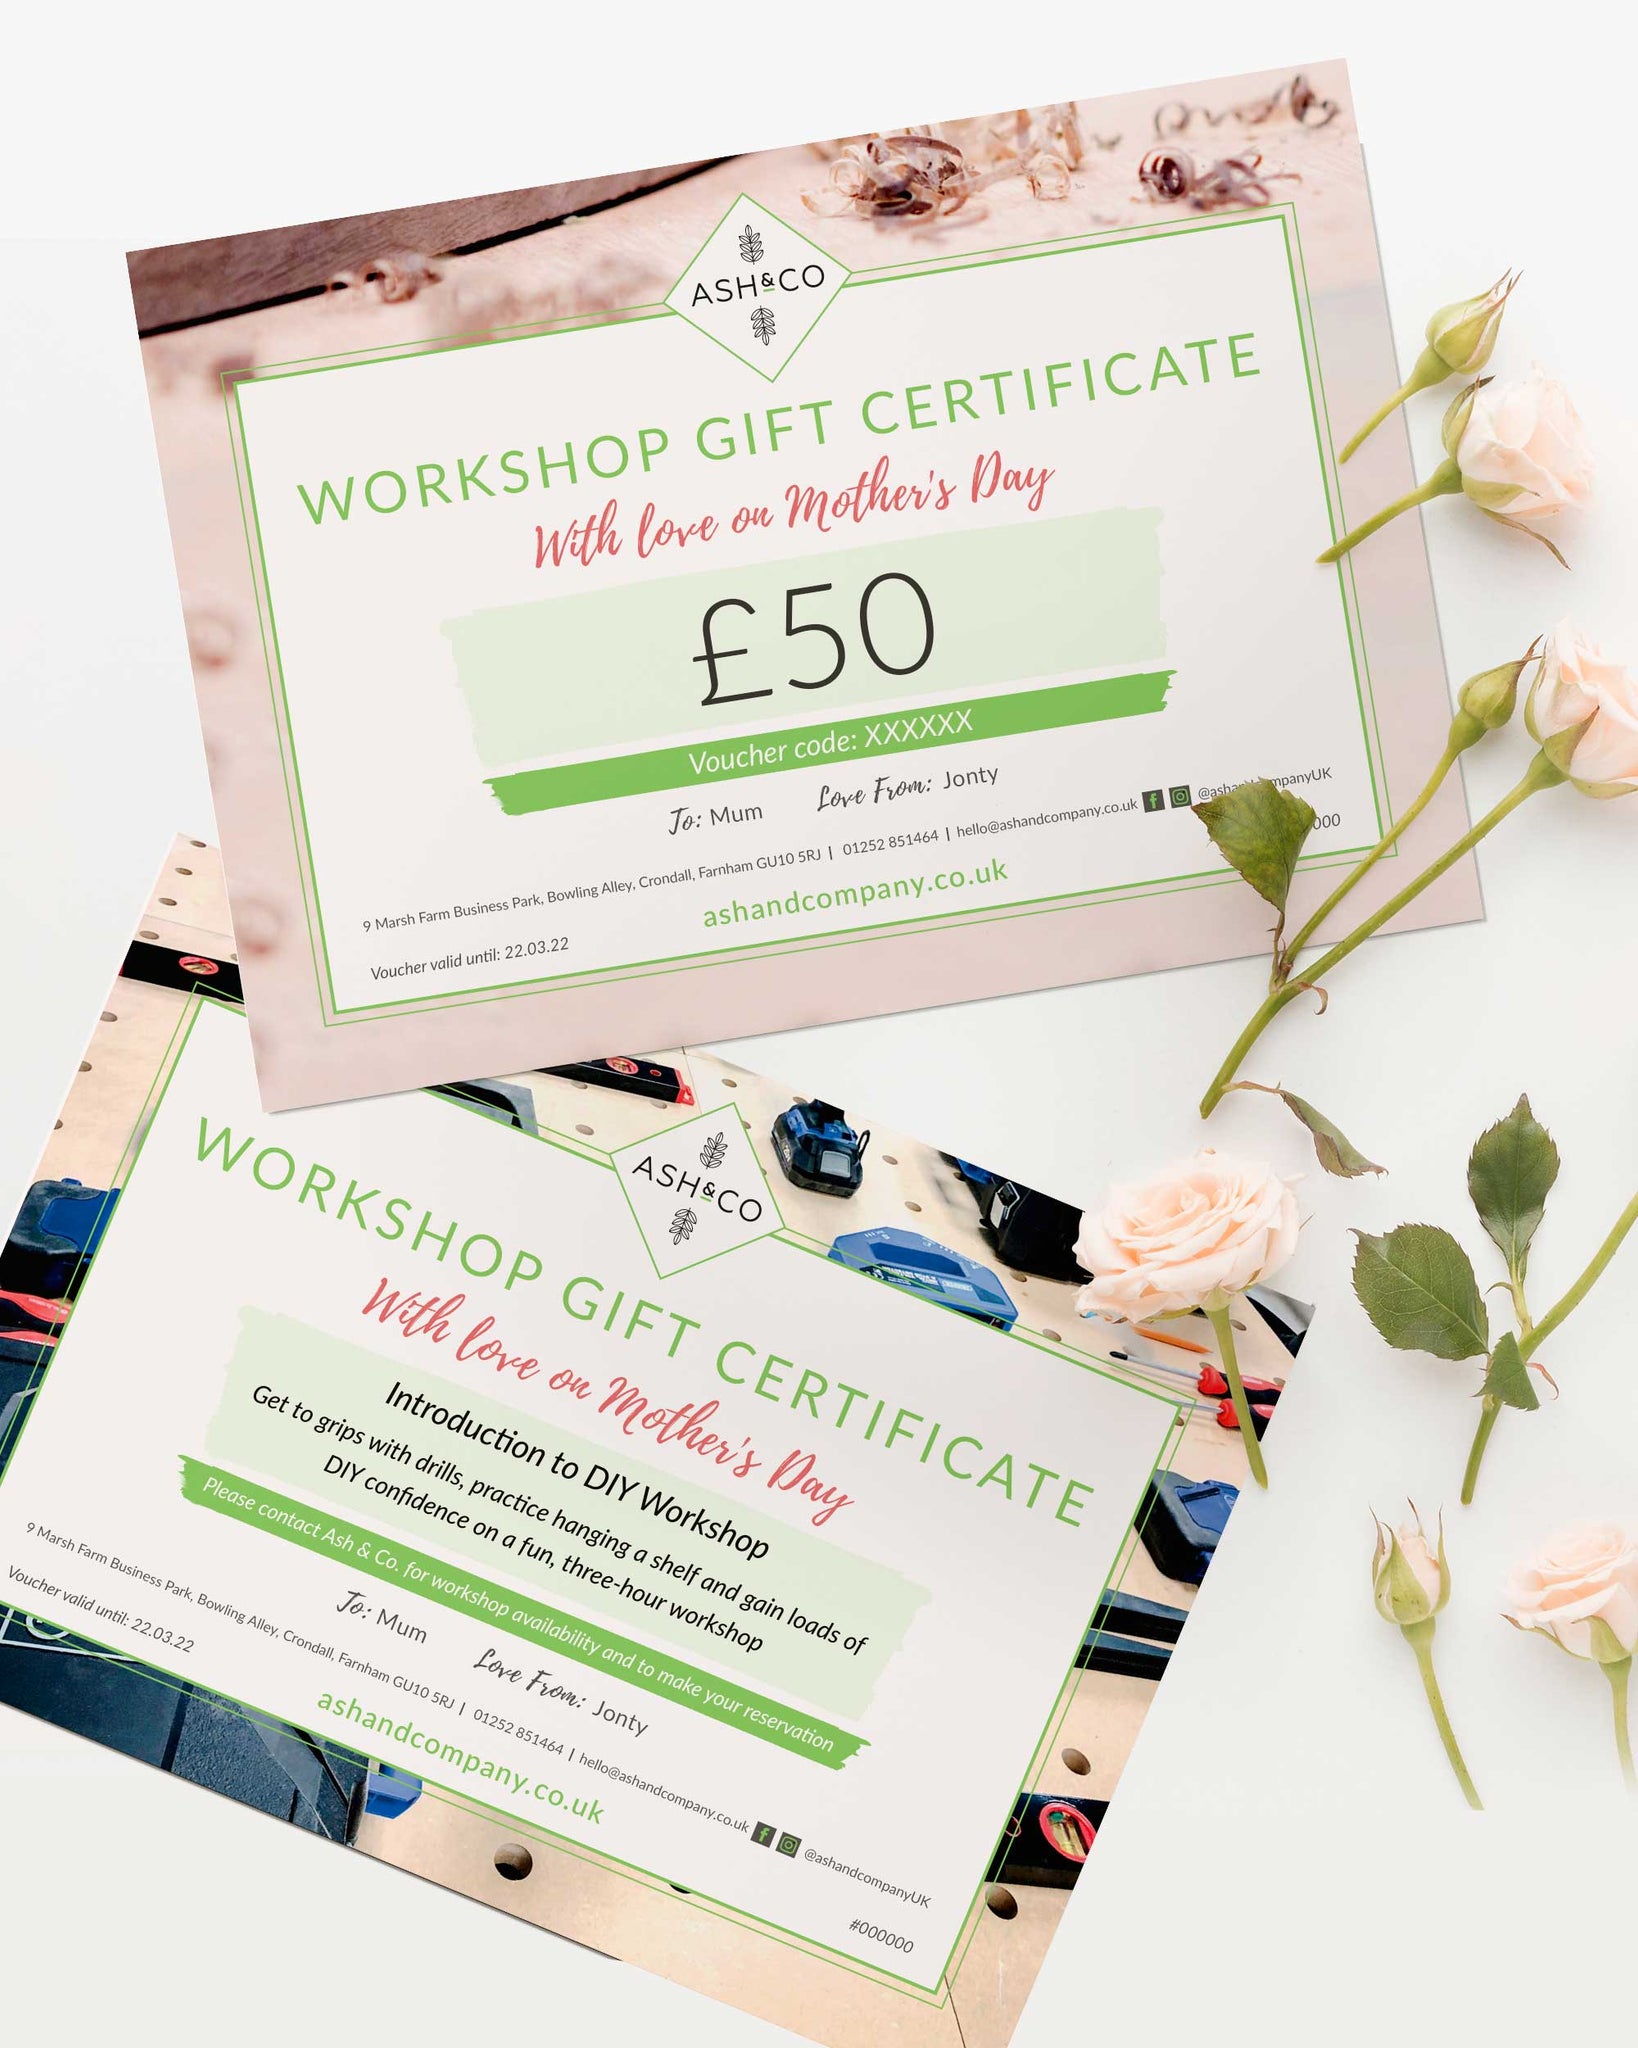 Gift Voucher - with Free Personalised Printable Gift Certificate – Ash & Co. Workshops